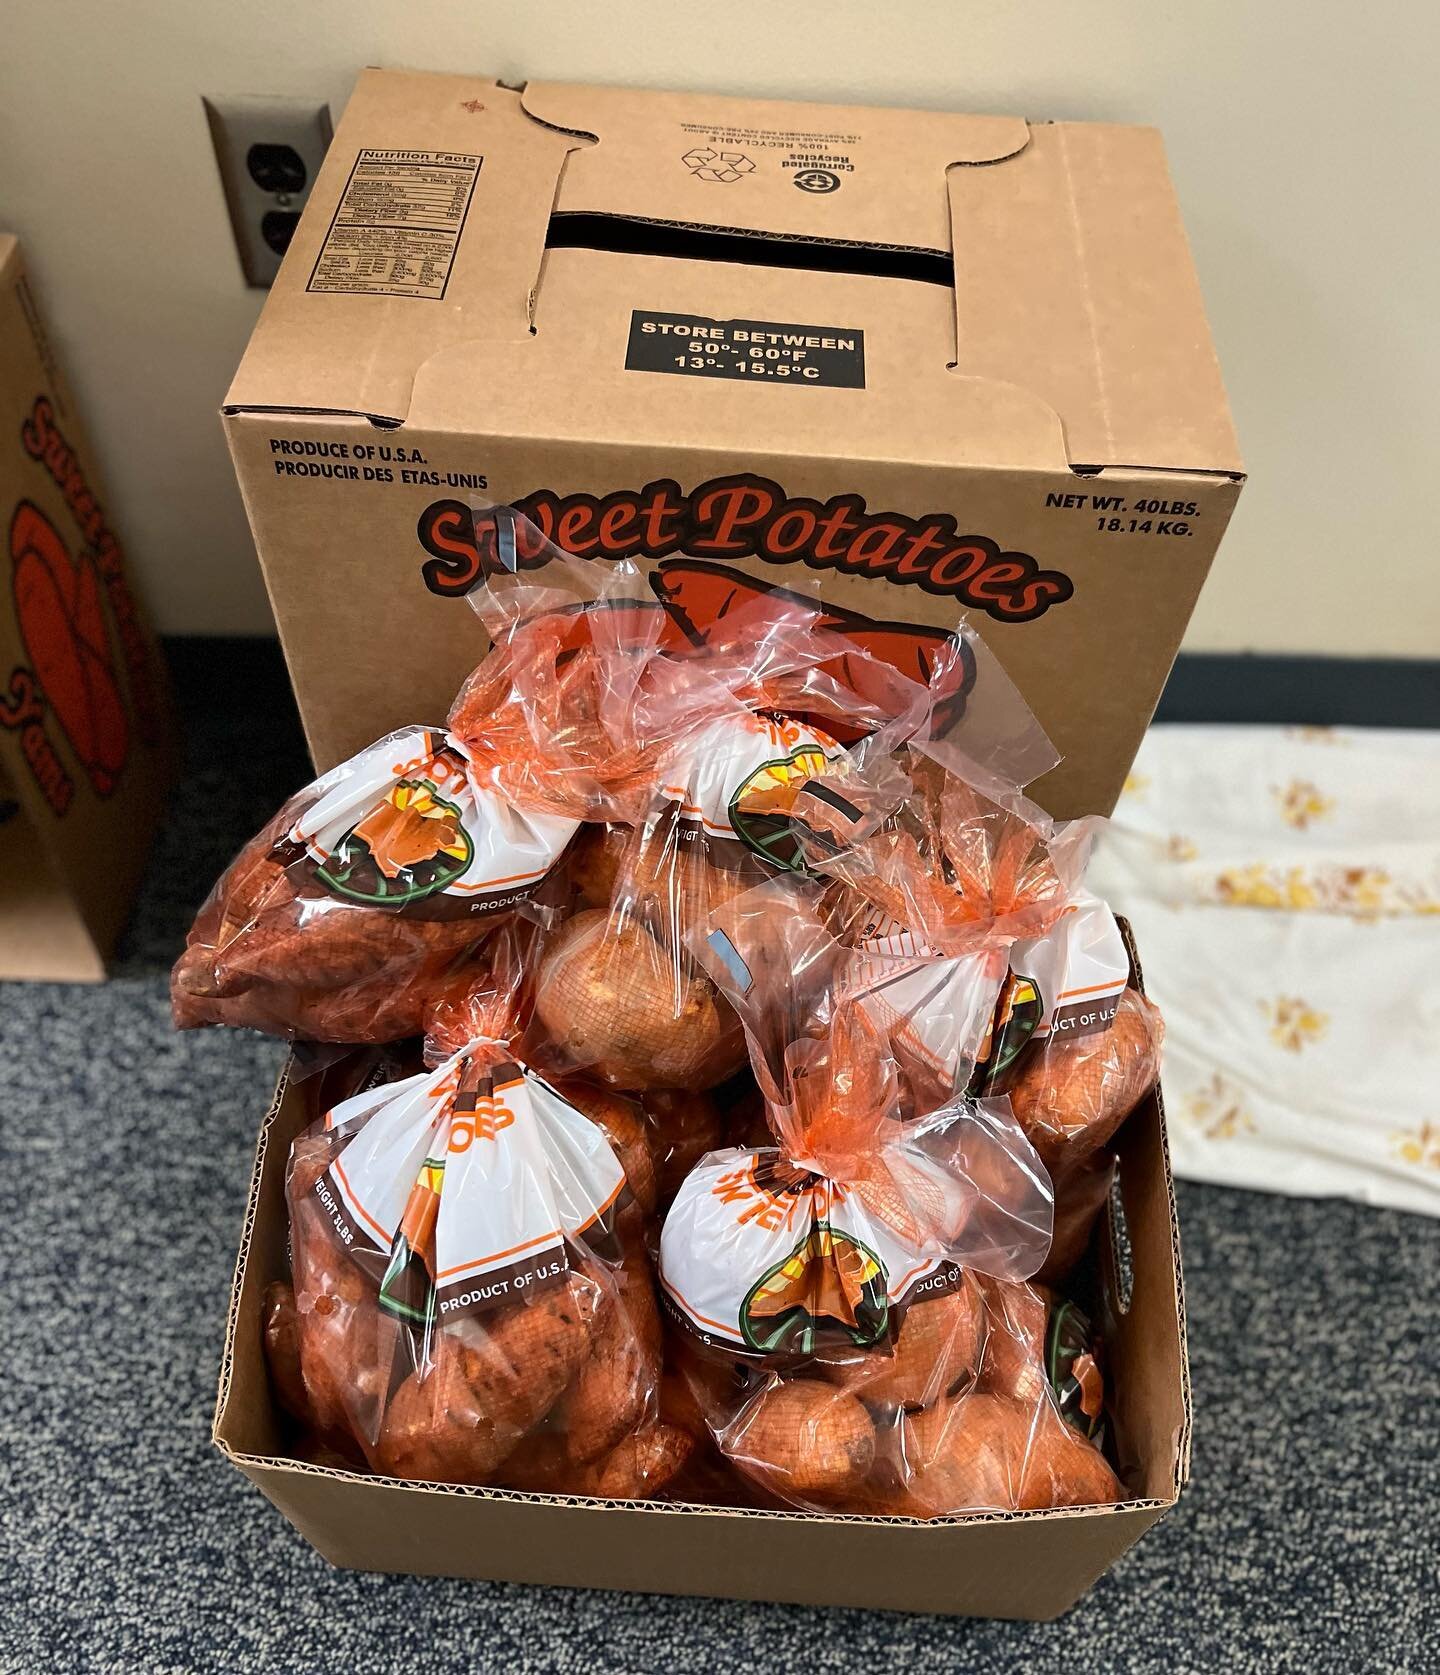 Enjoyed giving away bags of sweetpotatoes at Princeton Middle High School today as they finished out their staff appreciation week. 
We are very thankful for this group of people at this great community school which has seen our own family members an